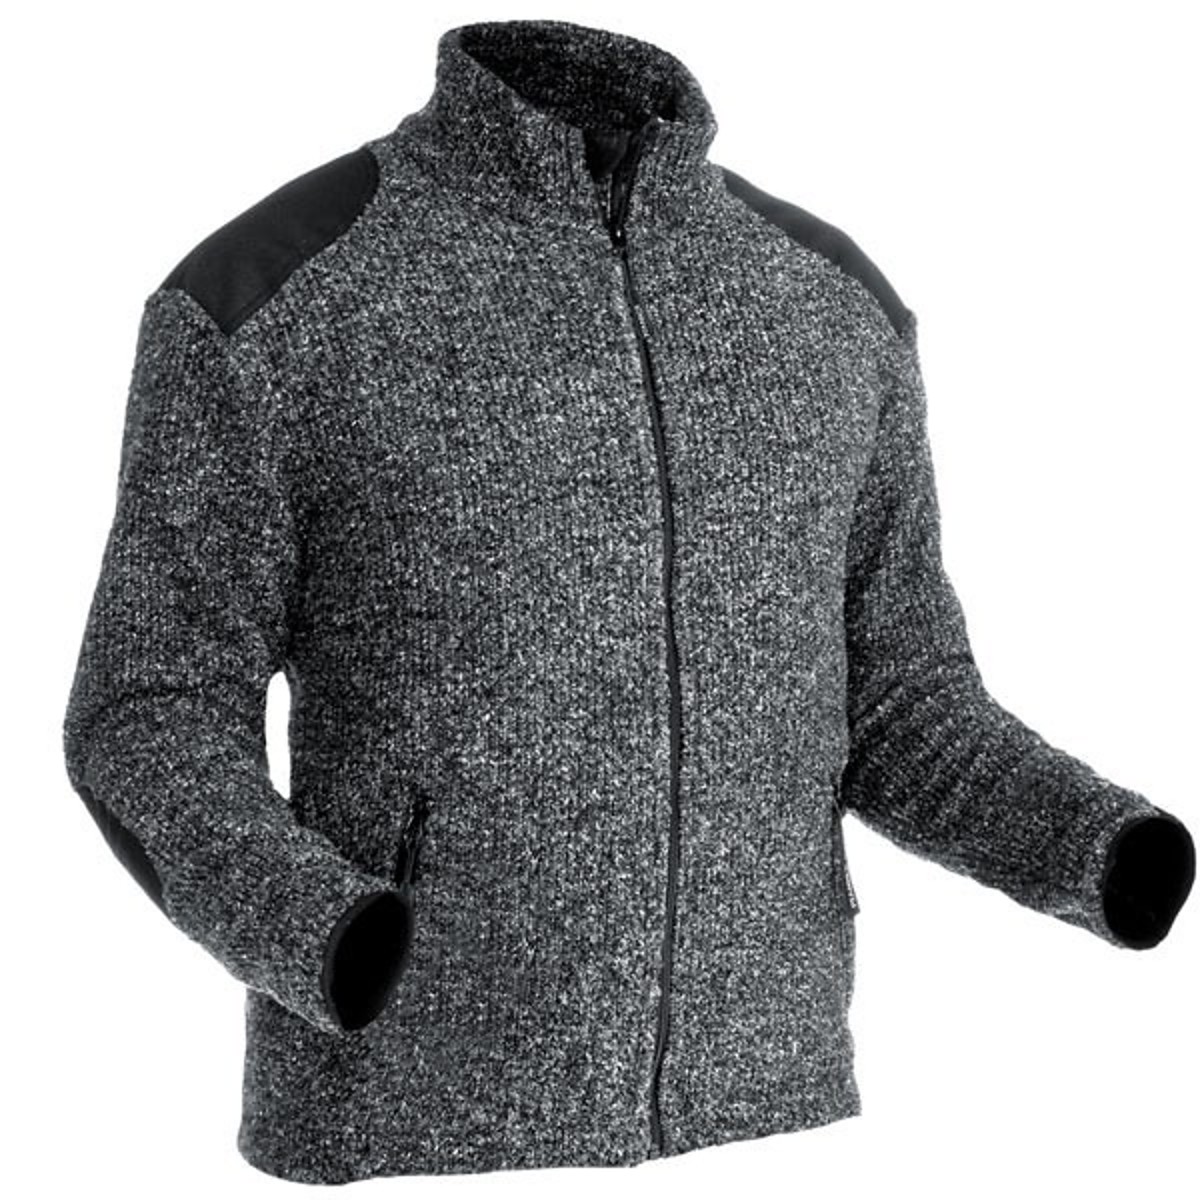 Pfanner Grizzly Jacke